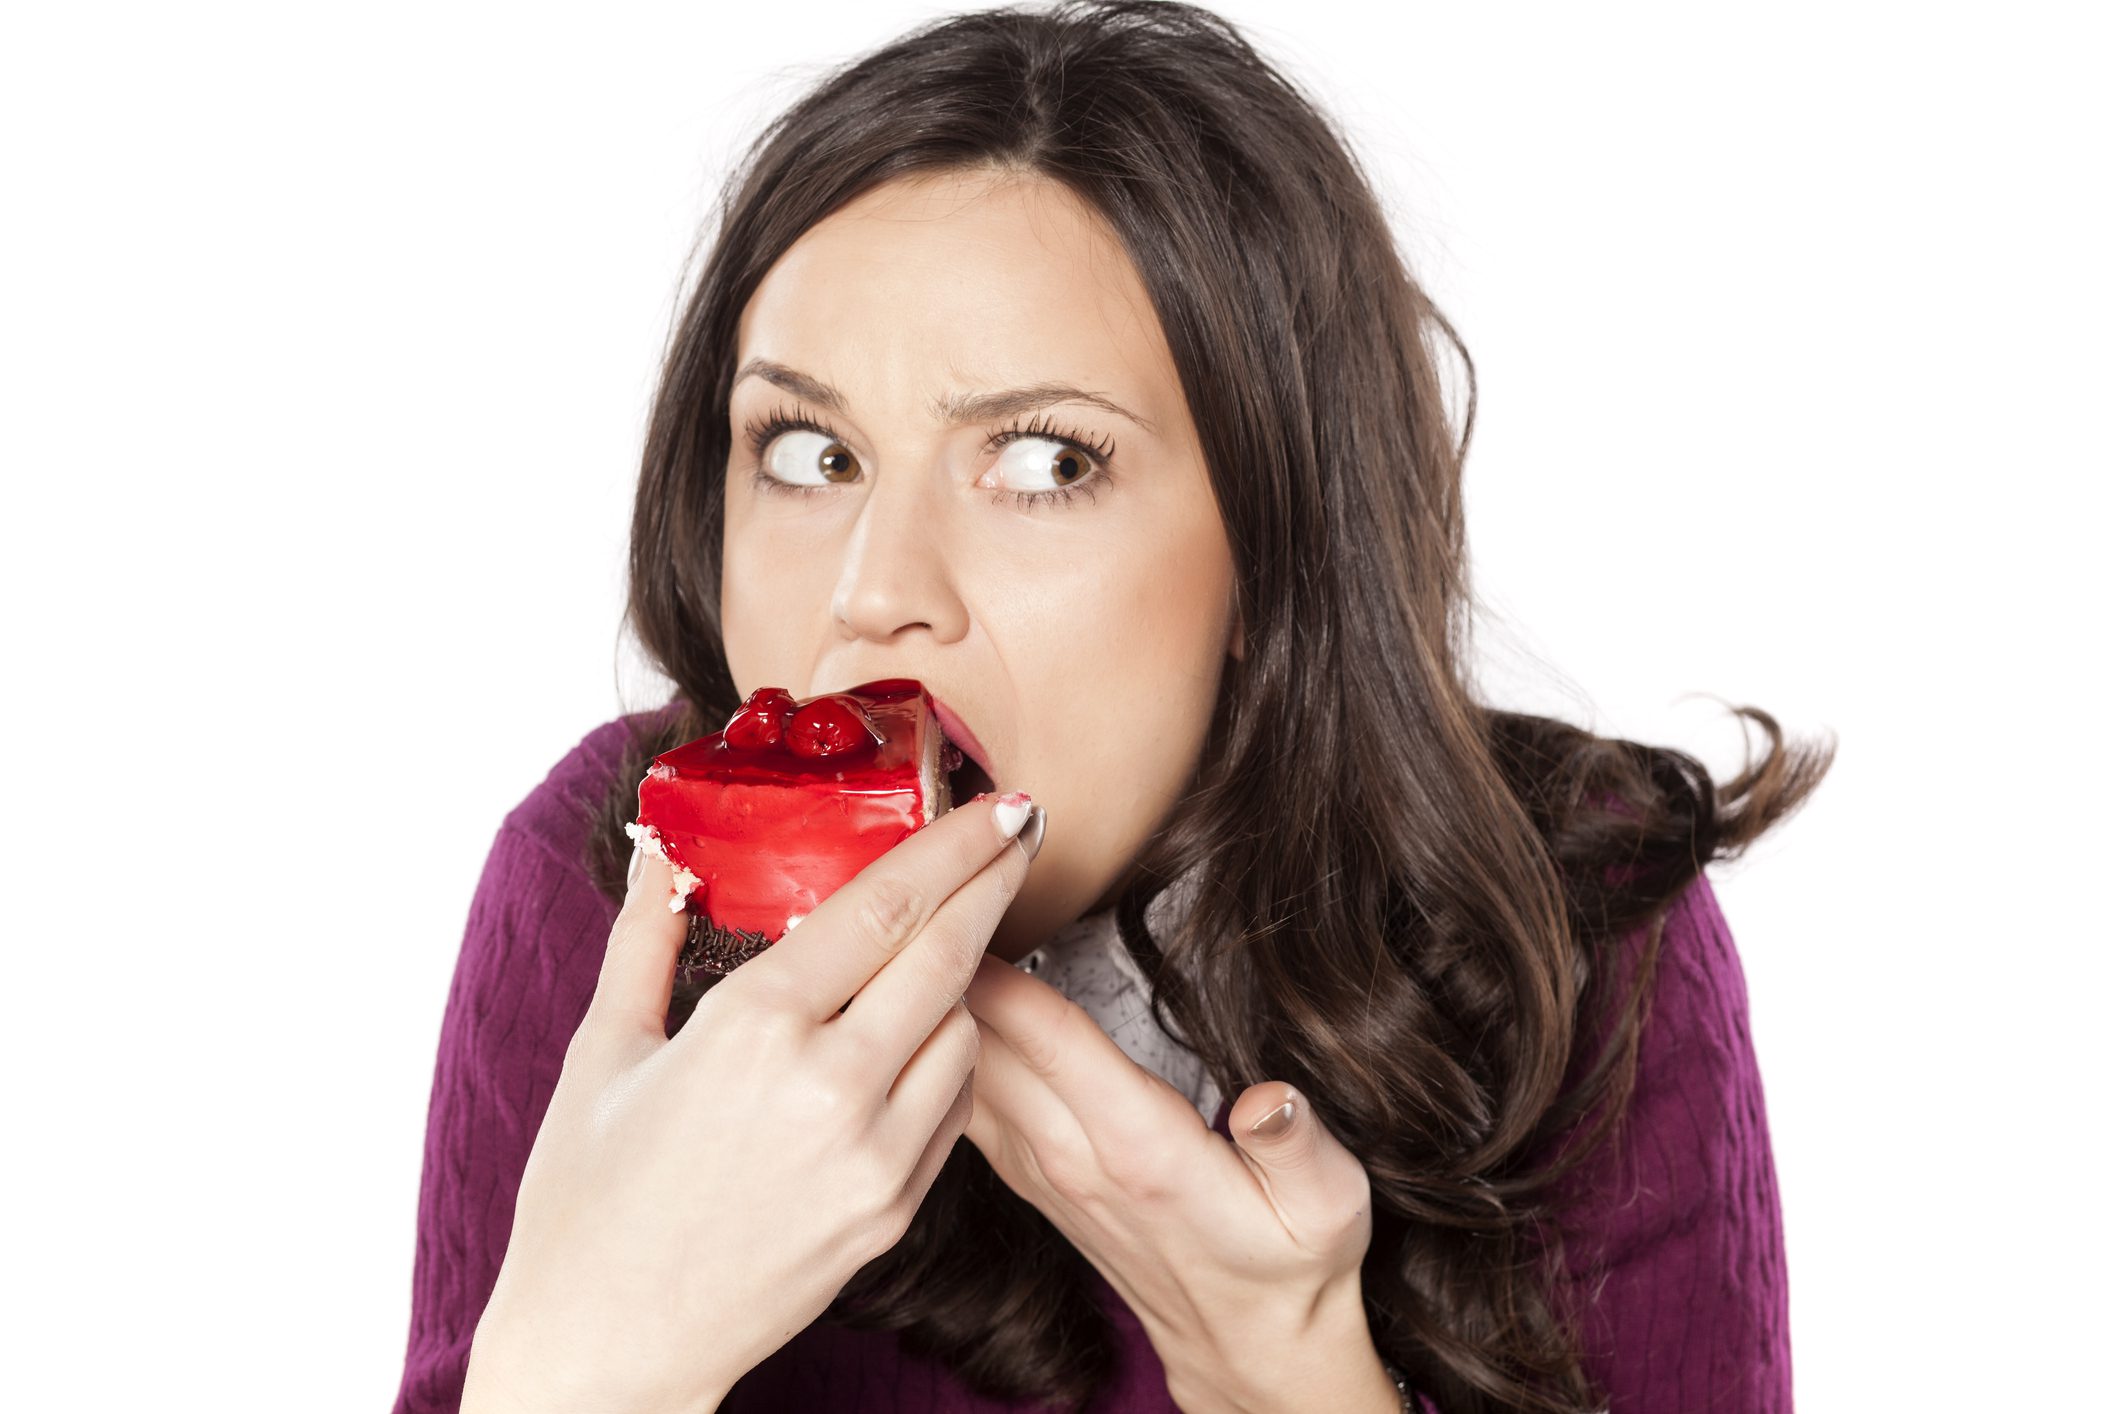 A woman eating a strawberry cake looking guilty